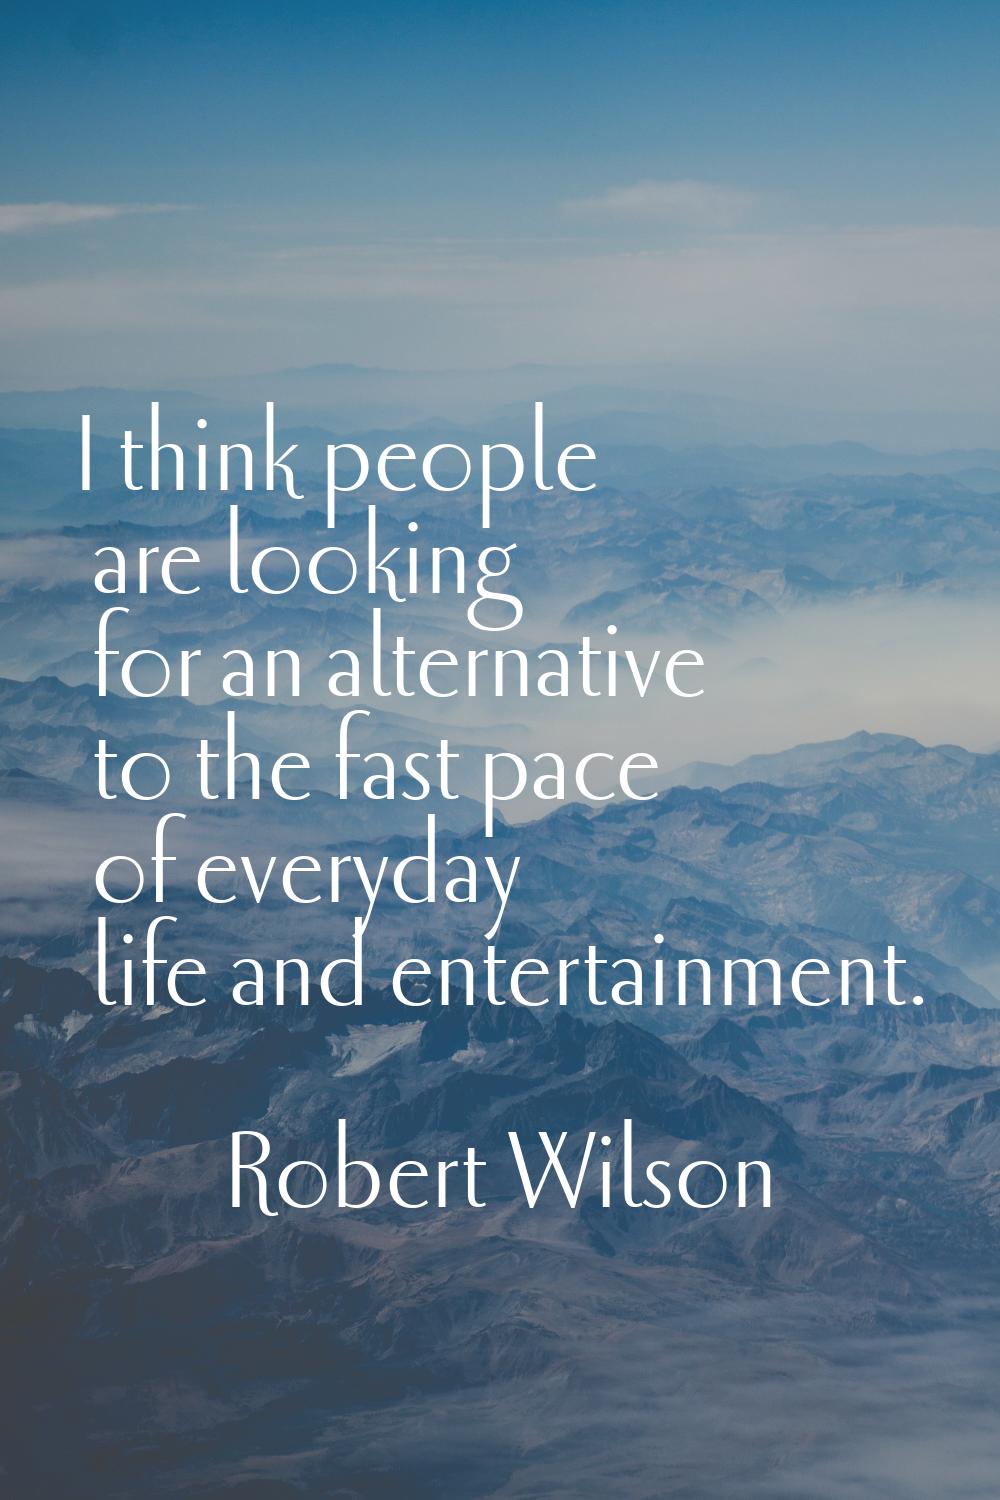 I think people are looking for an alternative to the fast pace of everyday life and entertainment.